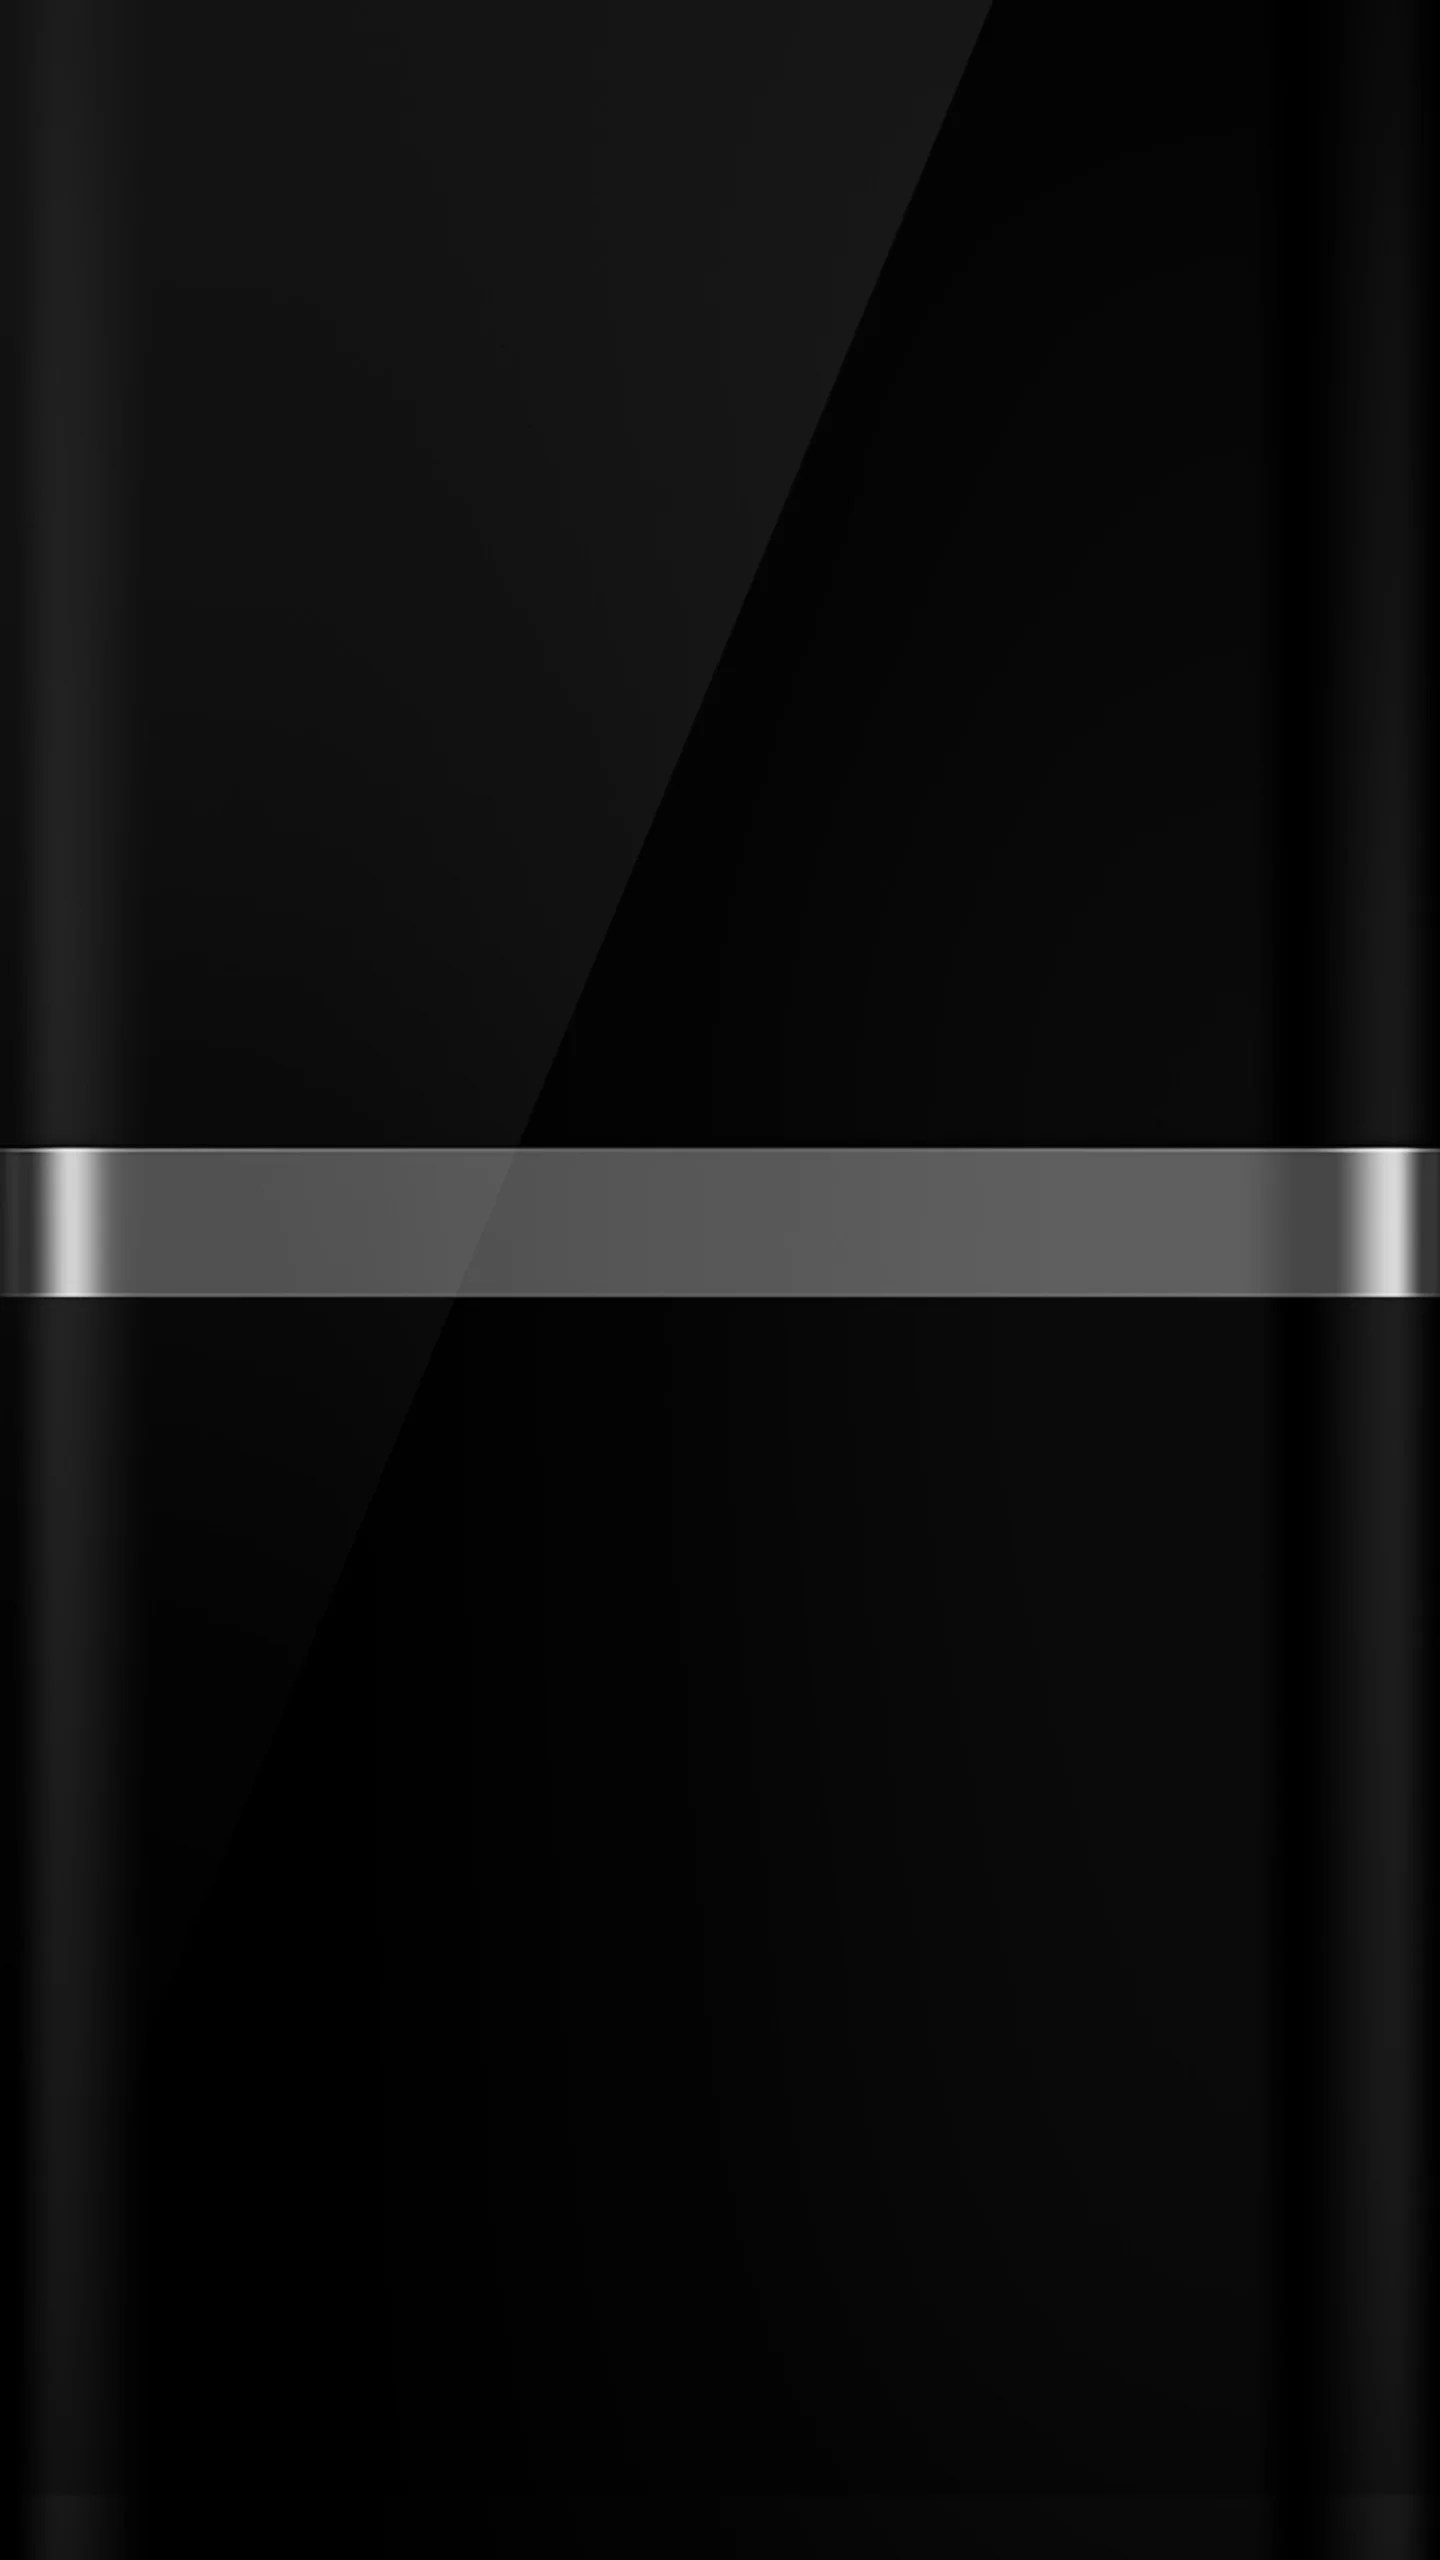 The Dark S7 Edge Wallpaper 08 with Black Background and Silver Line